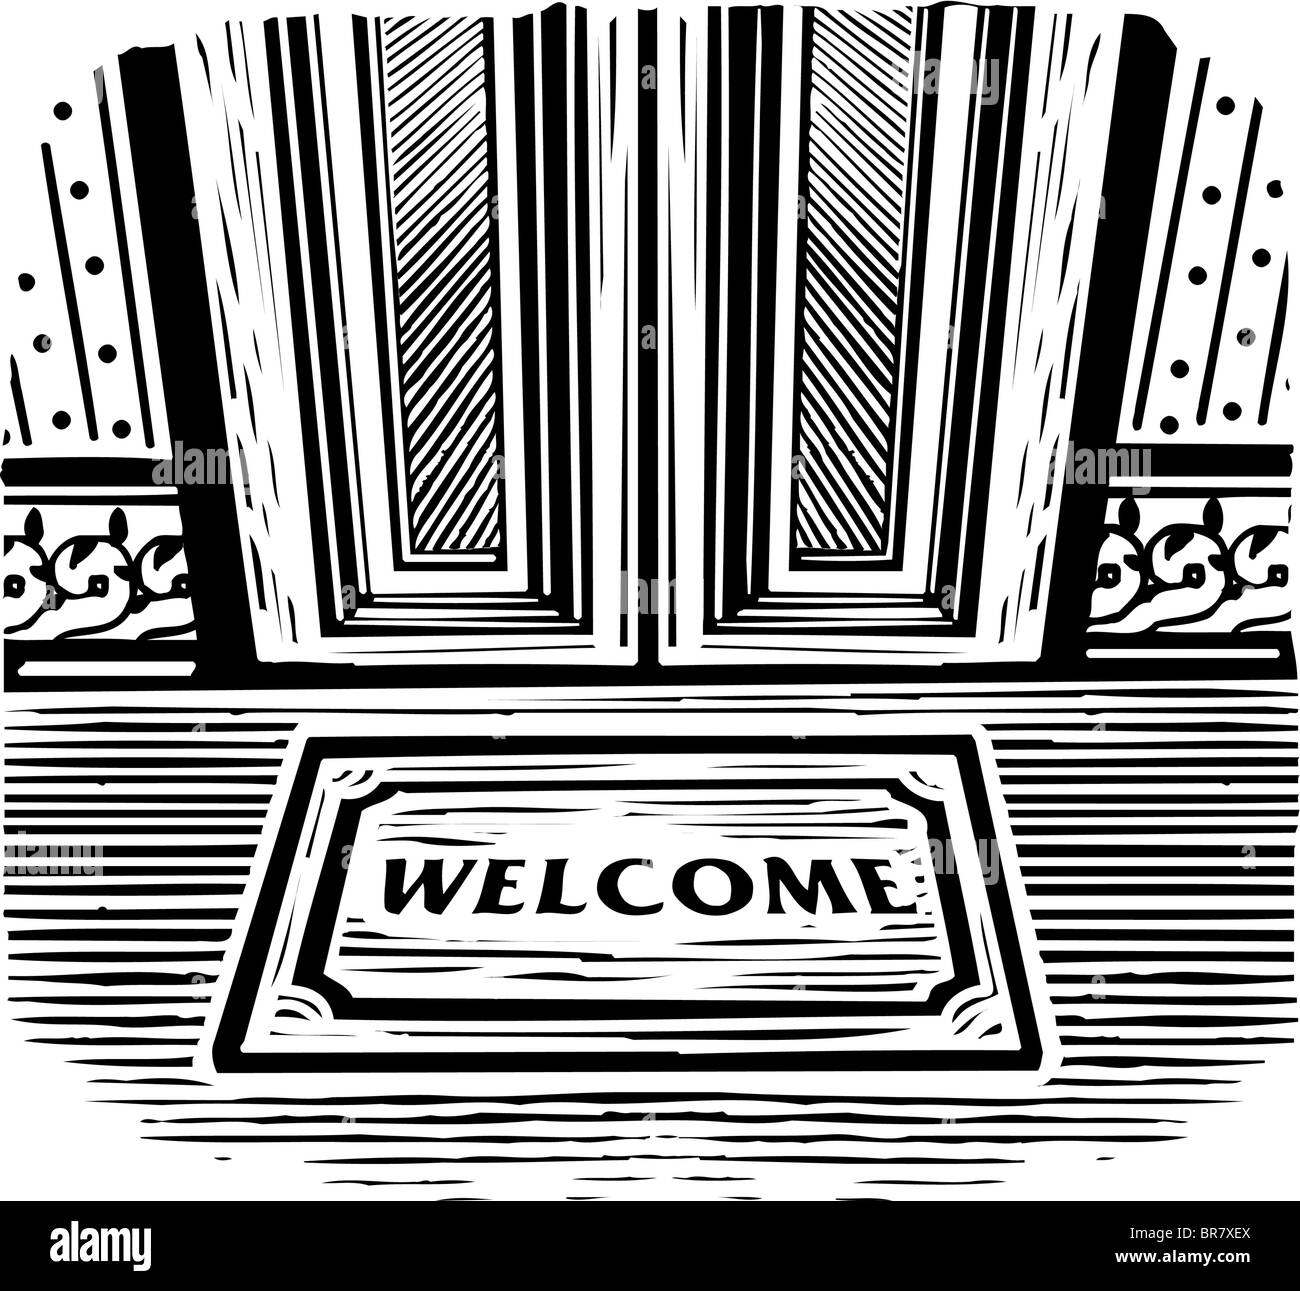 Door mat welcome Black and White Stock Photos & Images - Alamy